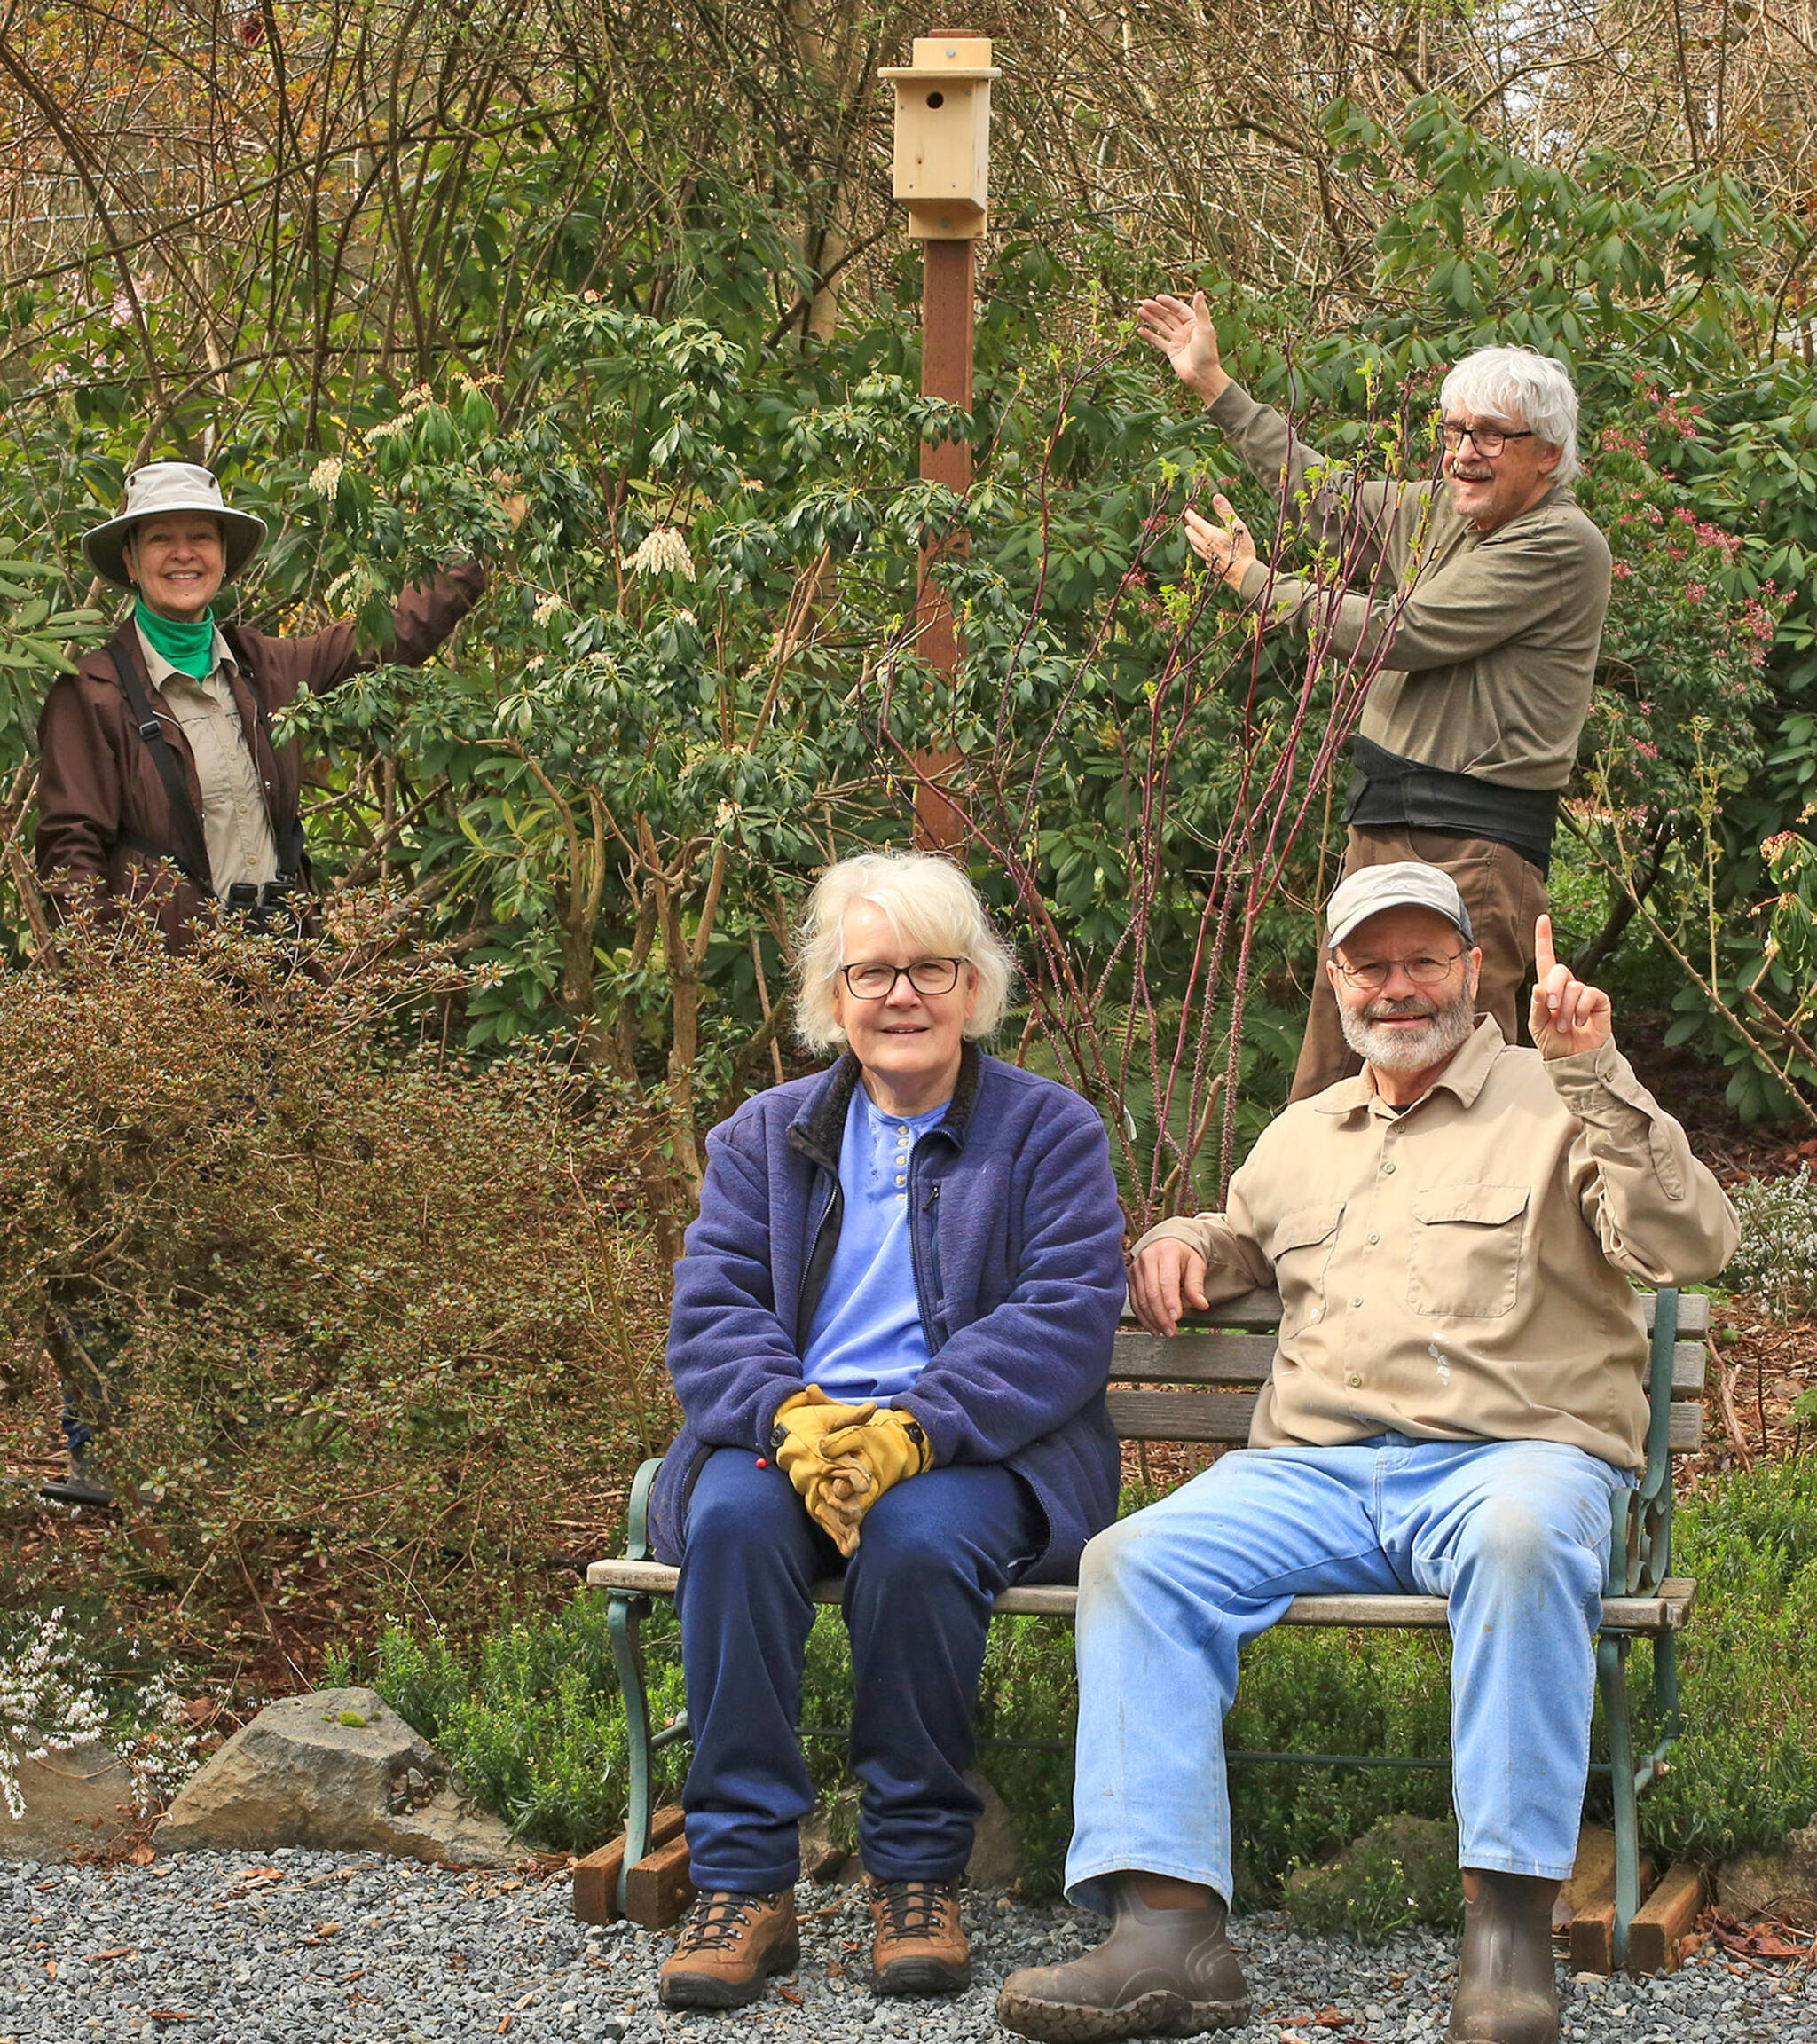 Linda Carlson (sitting, left), Ken Schroeder (sitting, right), Barbara Peterson (standing, left) and Jay Galvin (standing, right) of the Rainier Audubon Society pose in front of a nest box placed at Soos Creek Botanical Gardens. Photo courtesy of Jay Galvin.